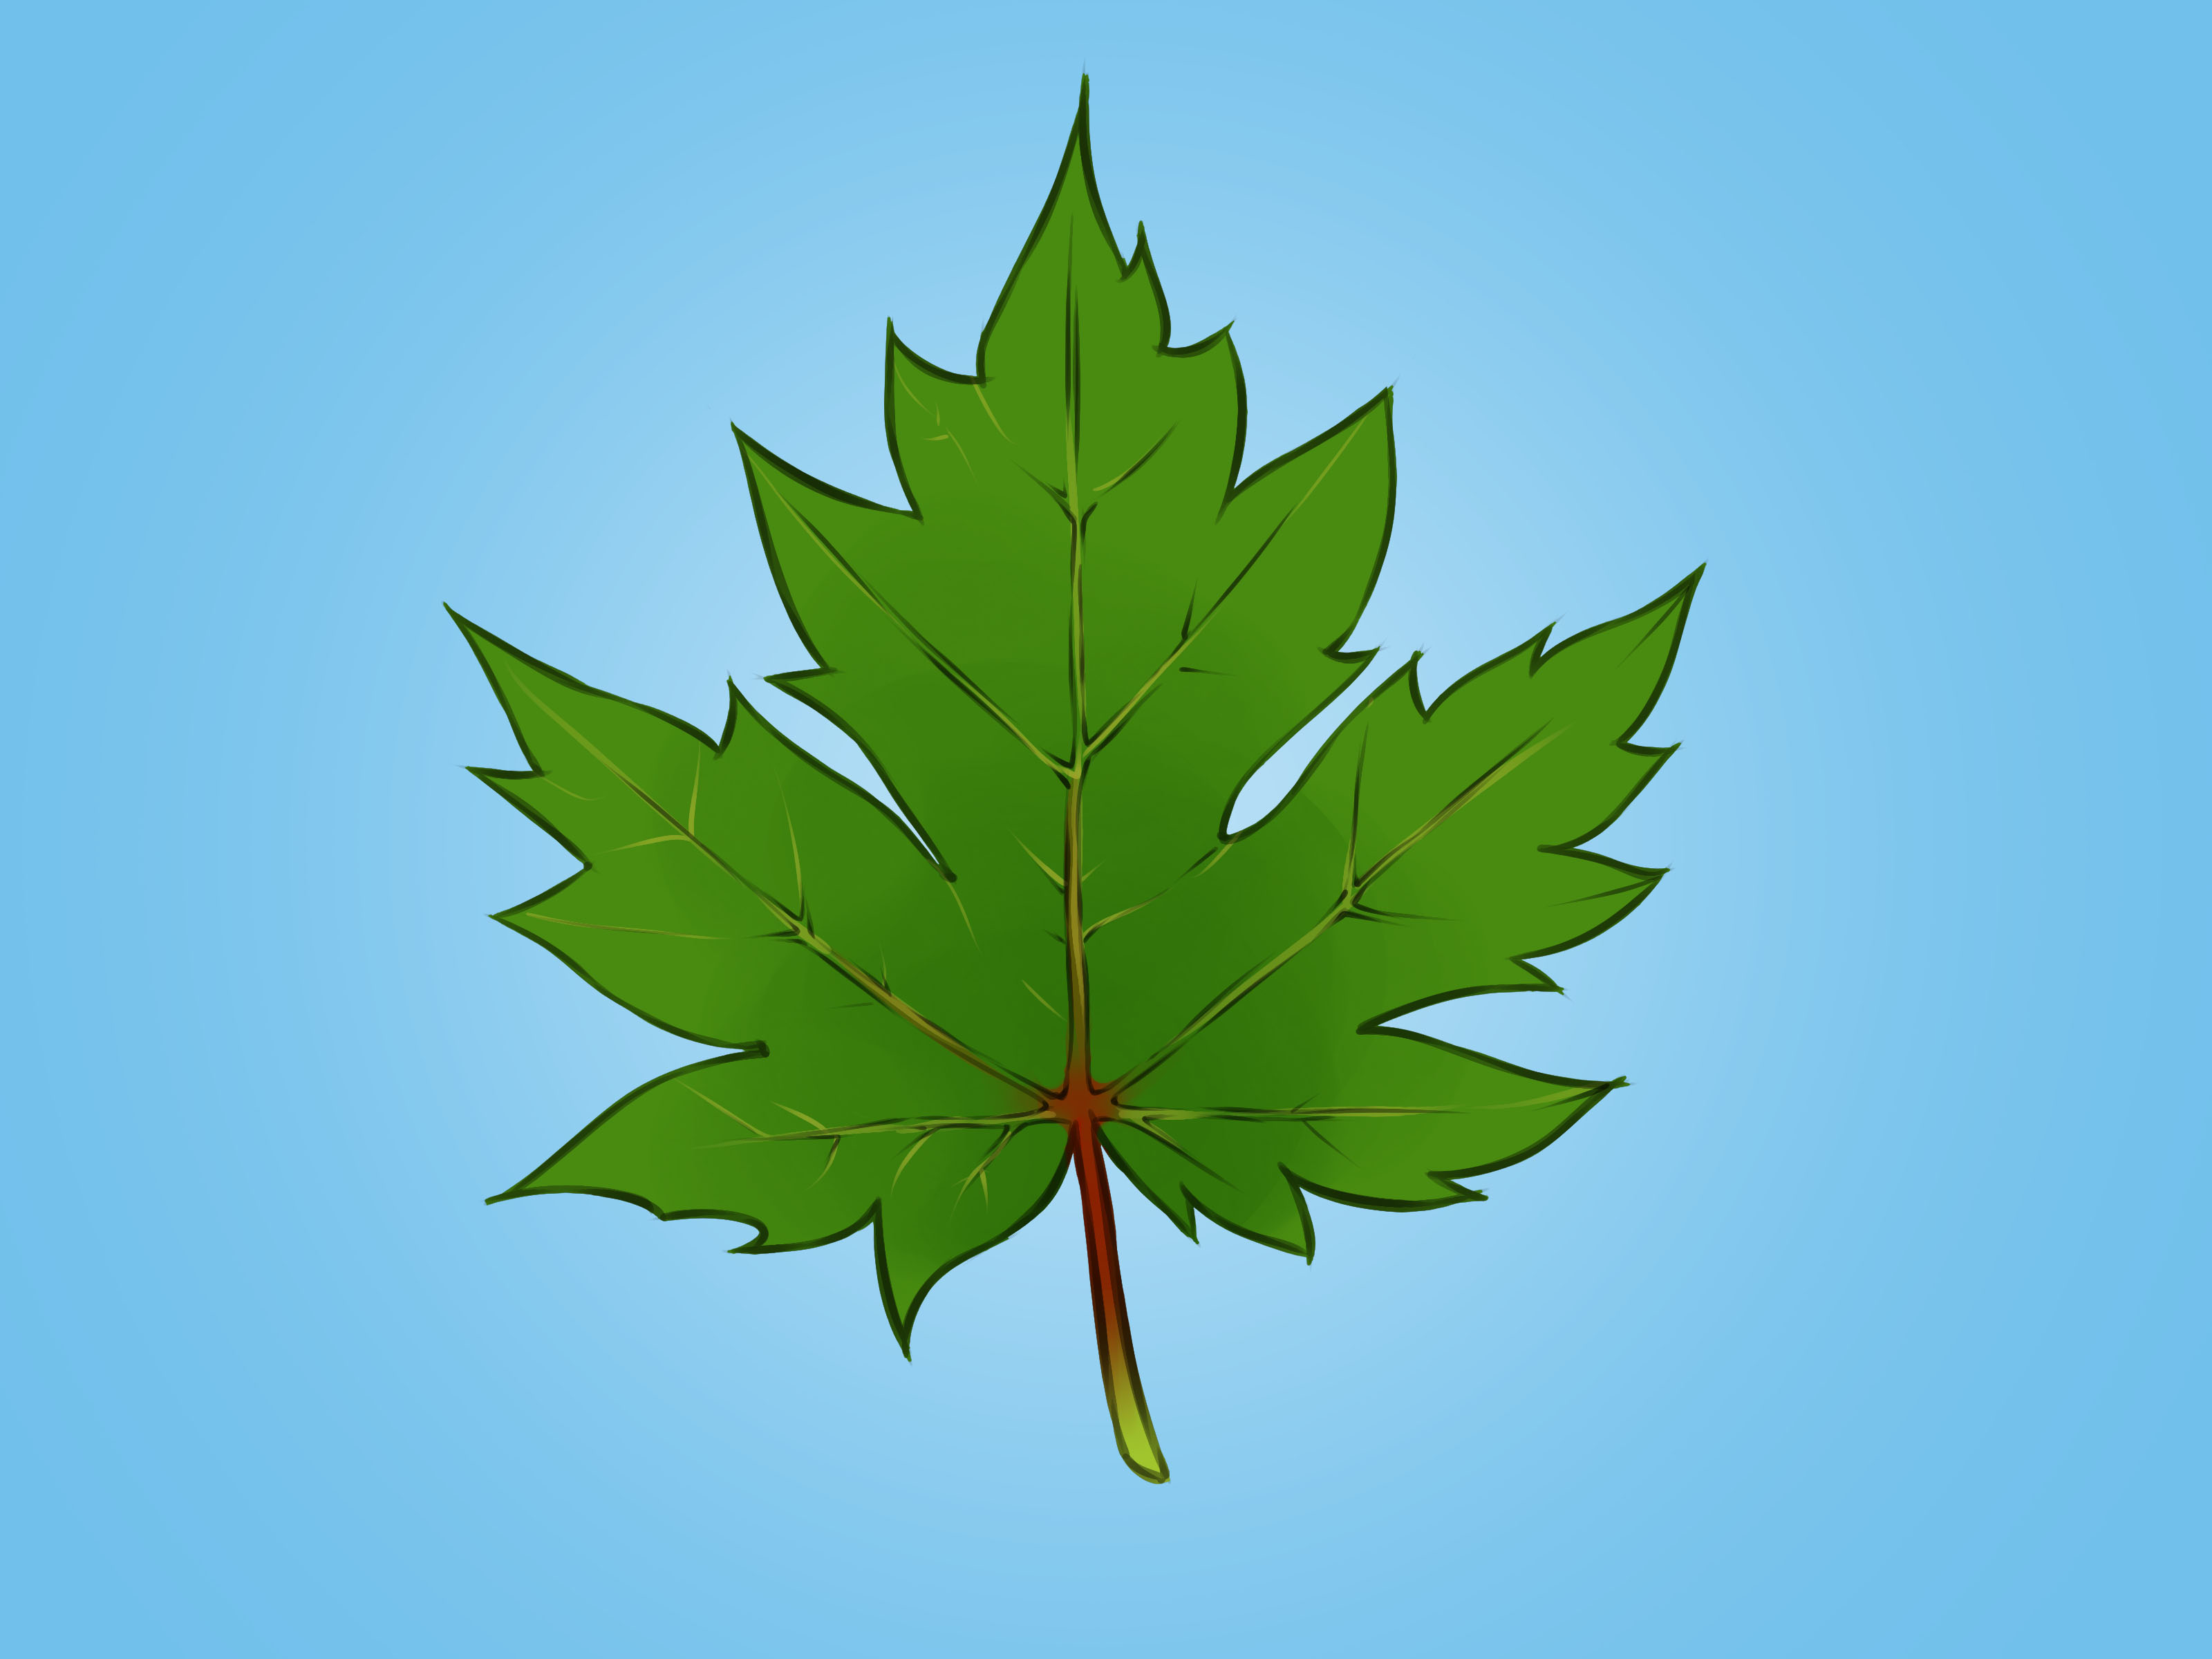 How to Draw a Maple Leaf: 12 Steps (with Pictures) - wikiHow